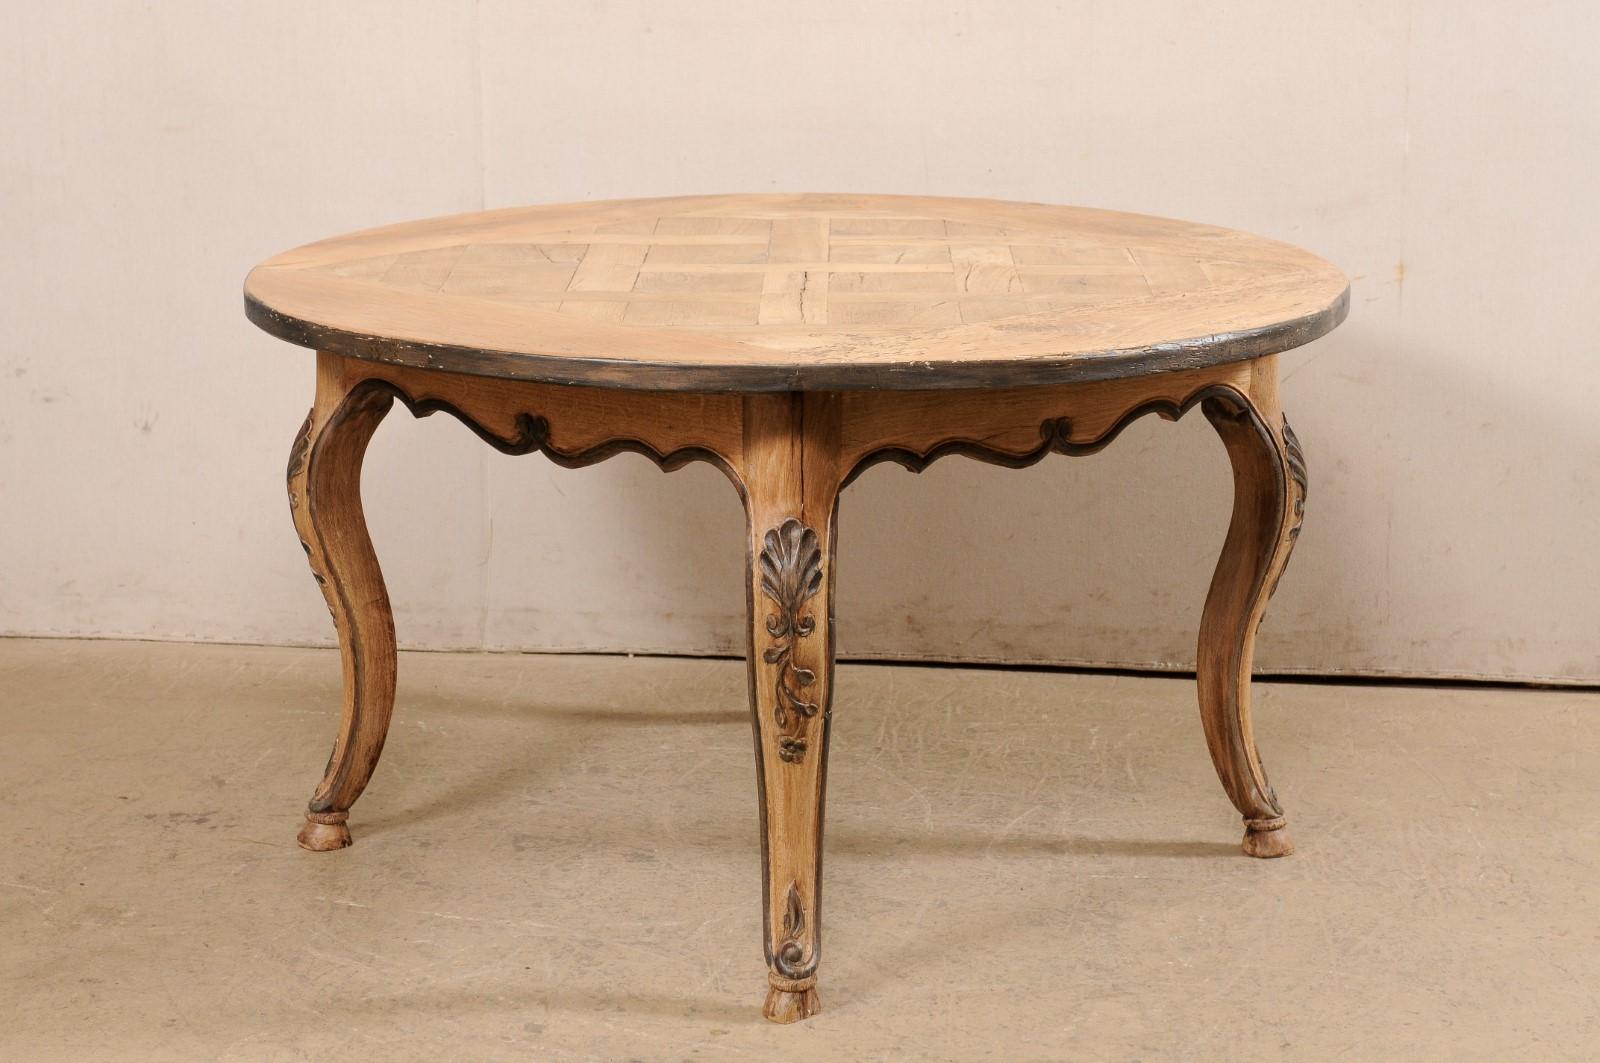 French Round Table W/Lovely Lattice Inlay Top & Scalloped Skirt, 19th C 6